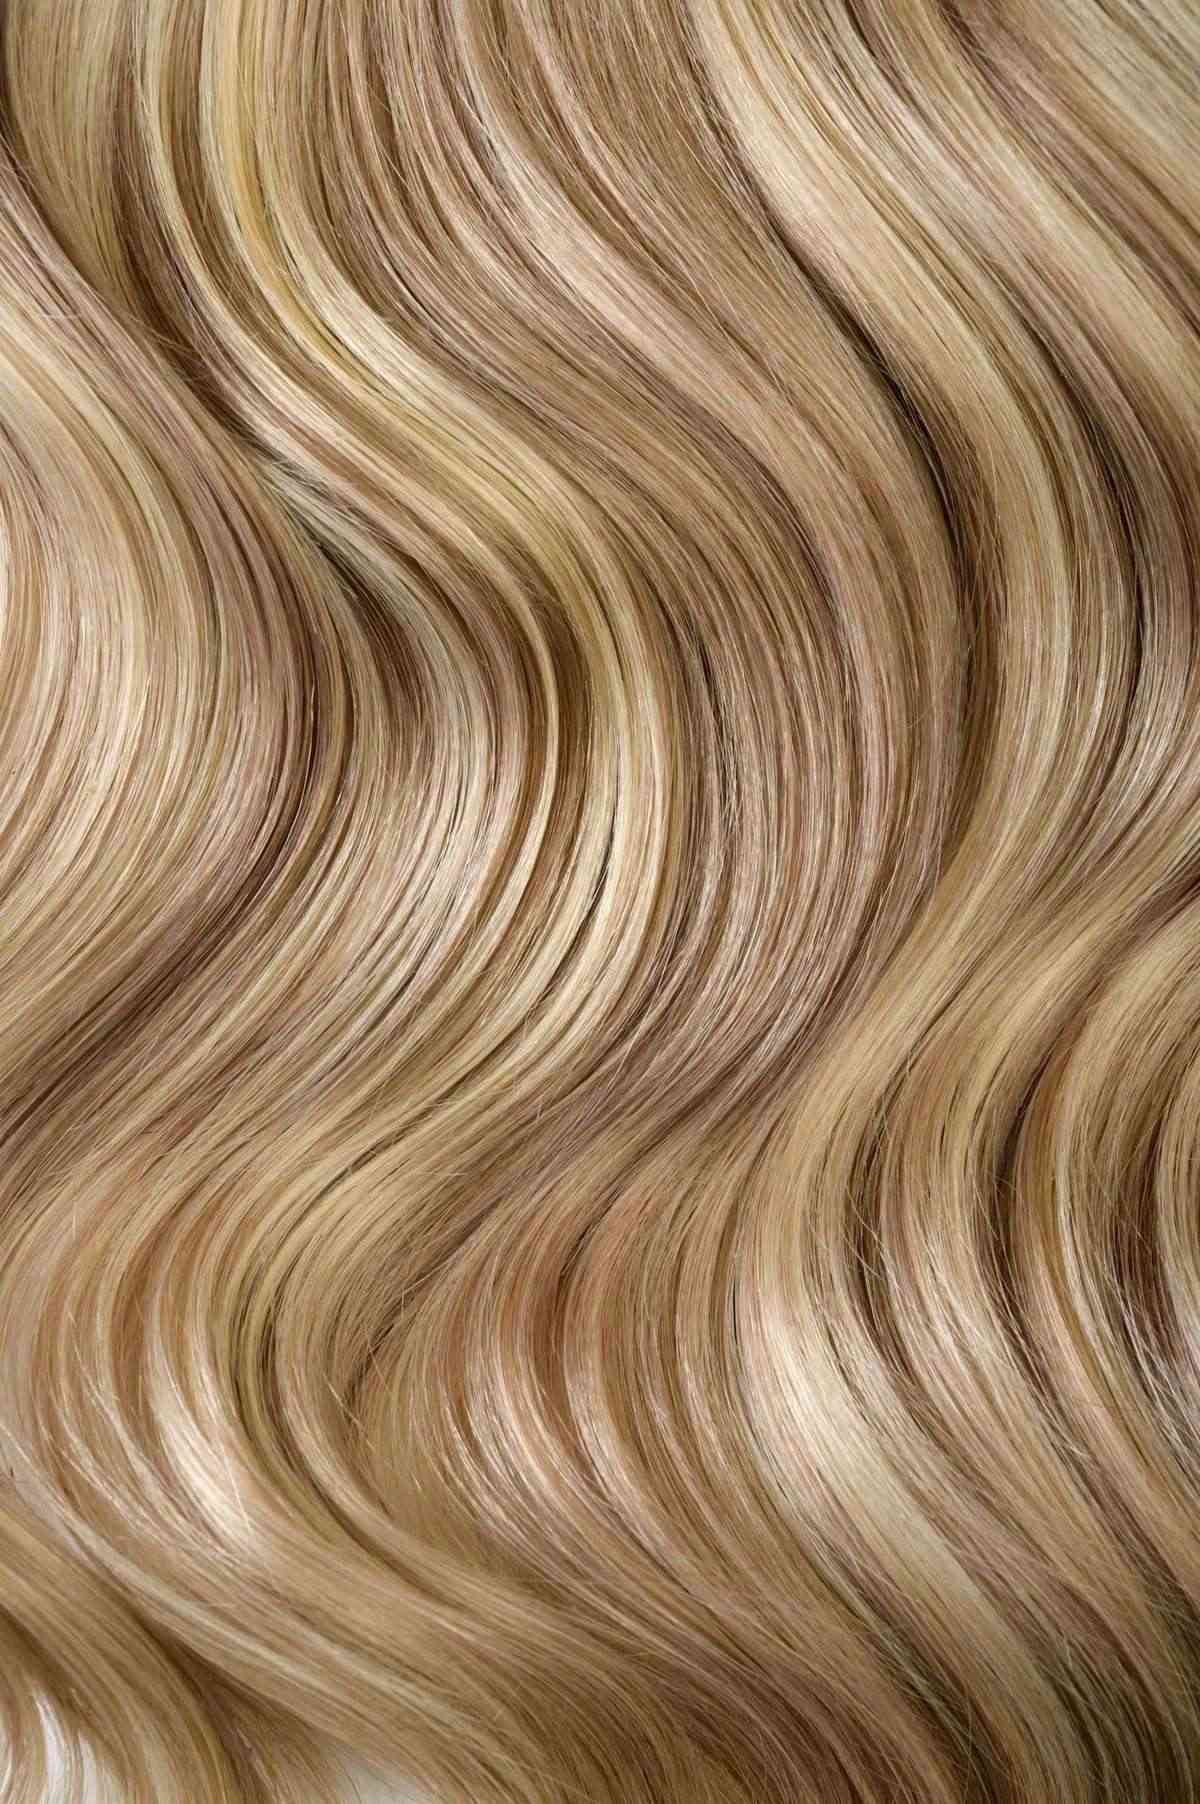 #18/613 Ash Blonde Highlights Ultra Seamless Tape In Extensions